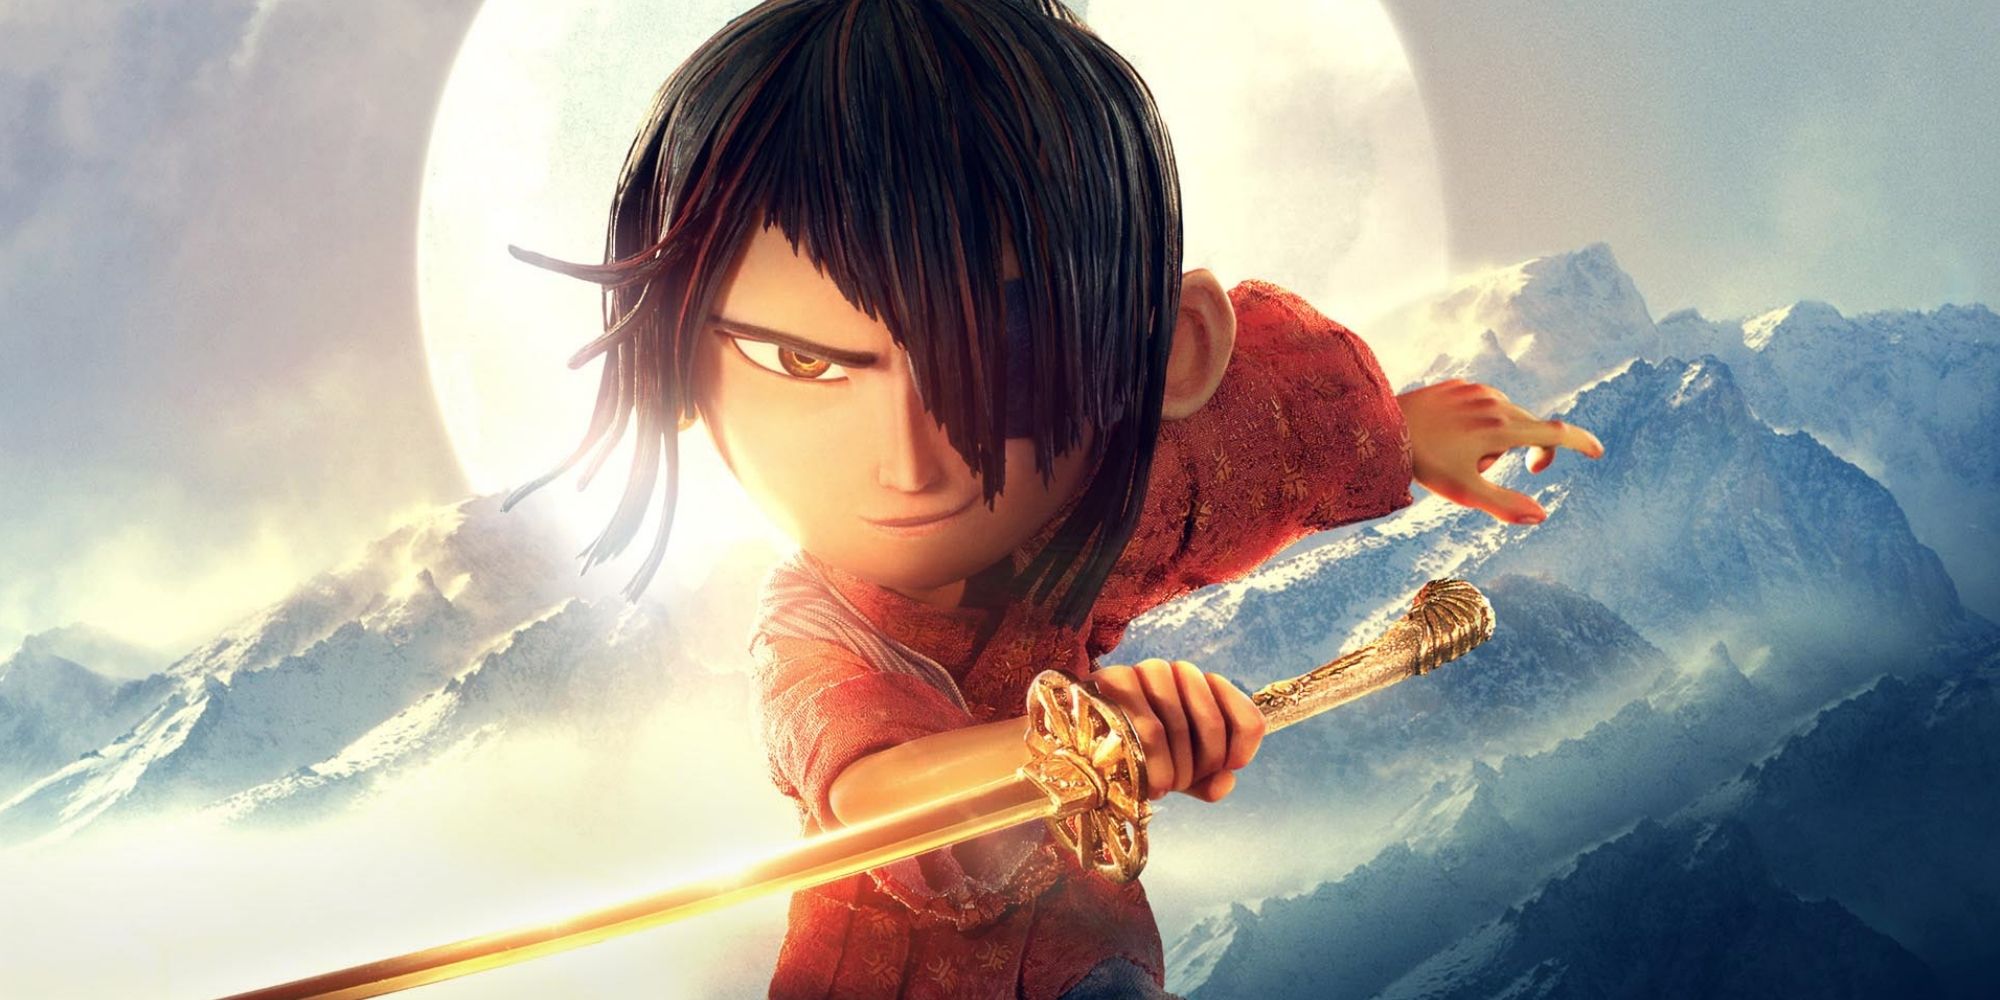 Wallpaper of Kubo holding "the Sword Unbreakable" from 'Kubo and the Two Strings'